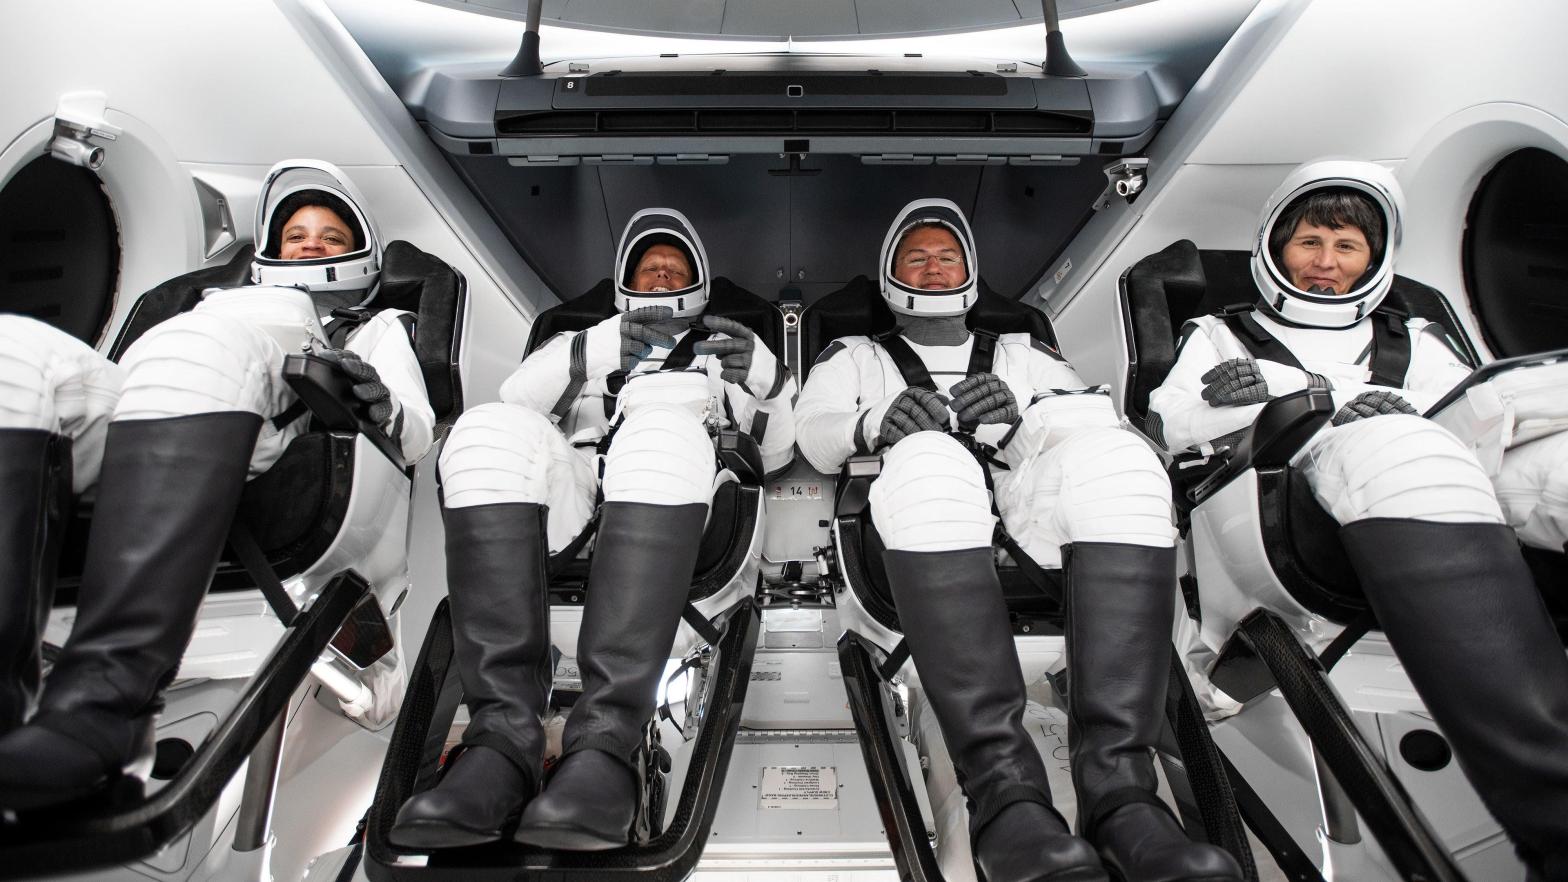 Crew-4 launched to the ISS aboard a Falcon 9 rocket. (Image: SpaceX)